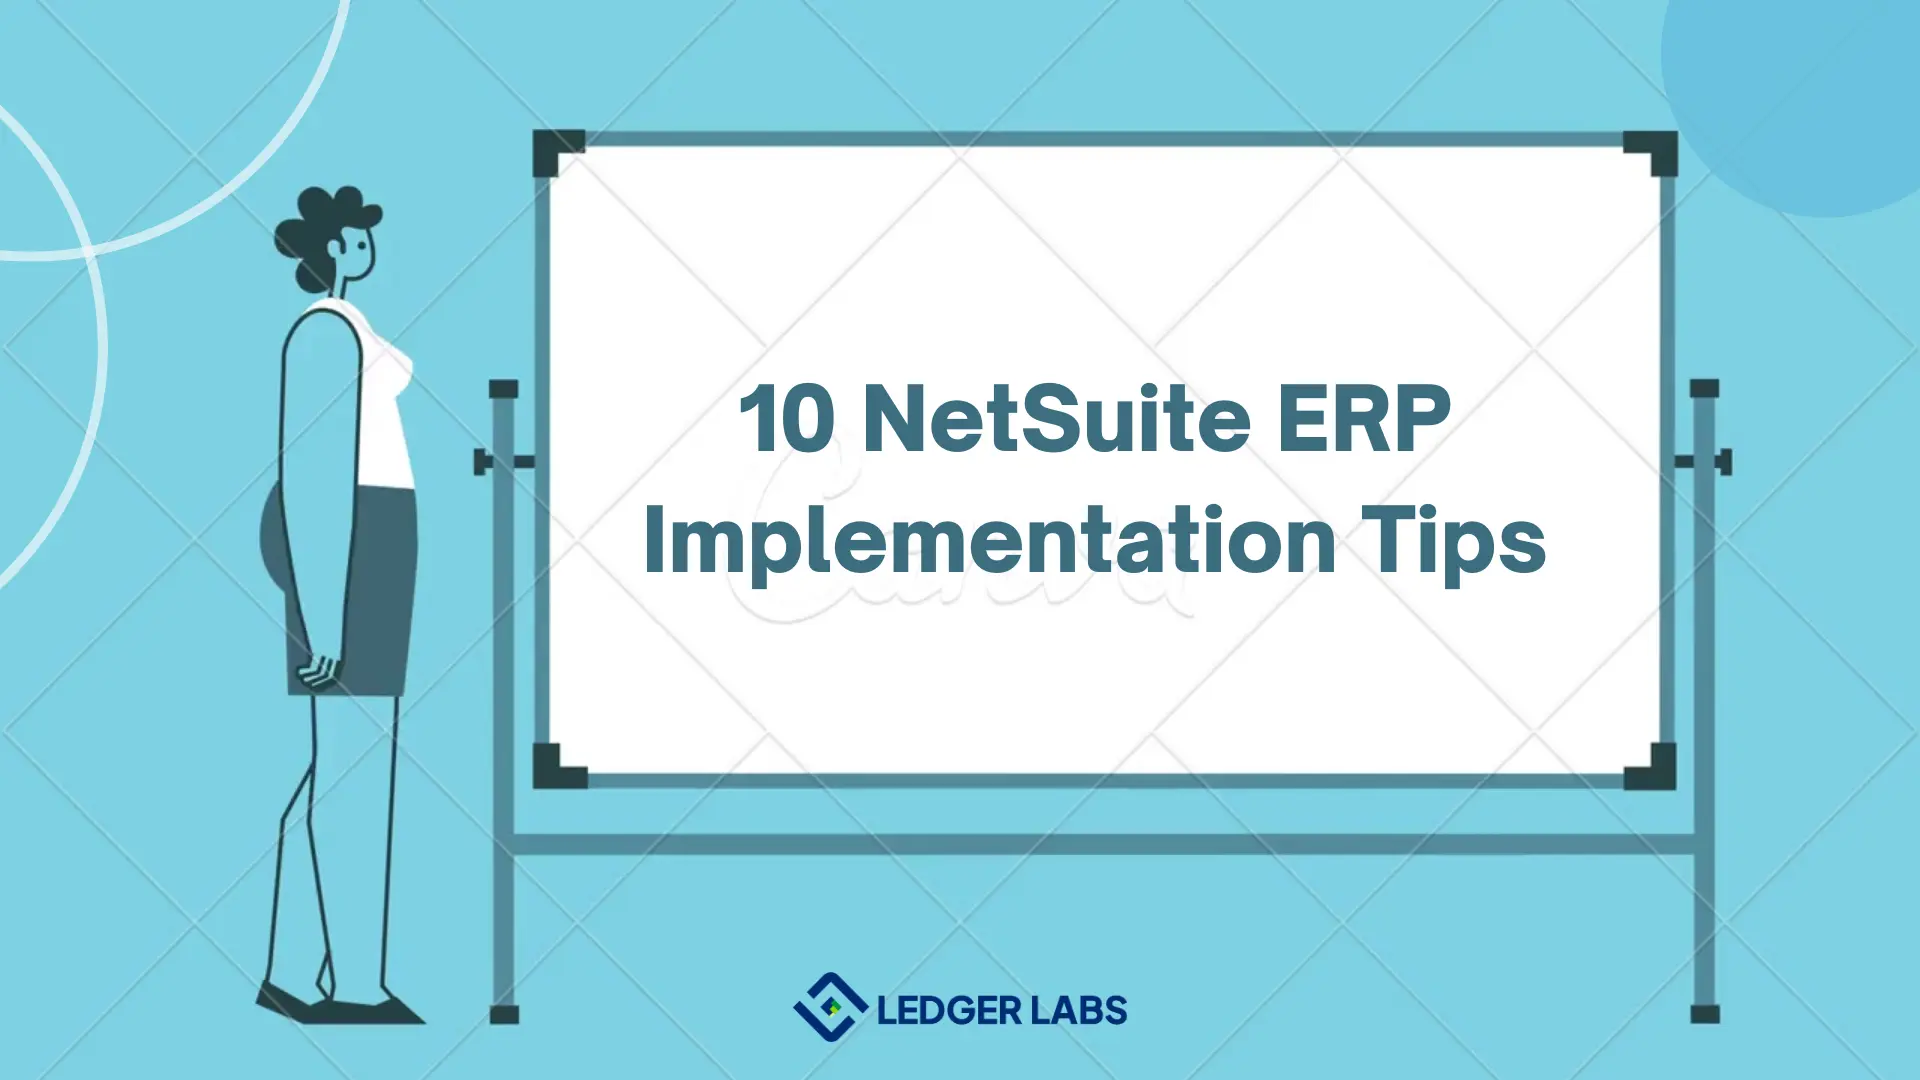 NetSuite ERP Implementation Tips